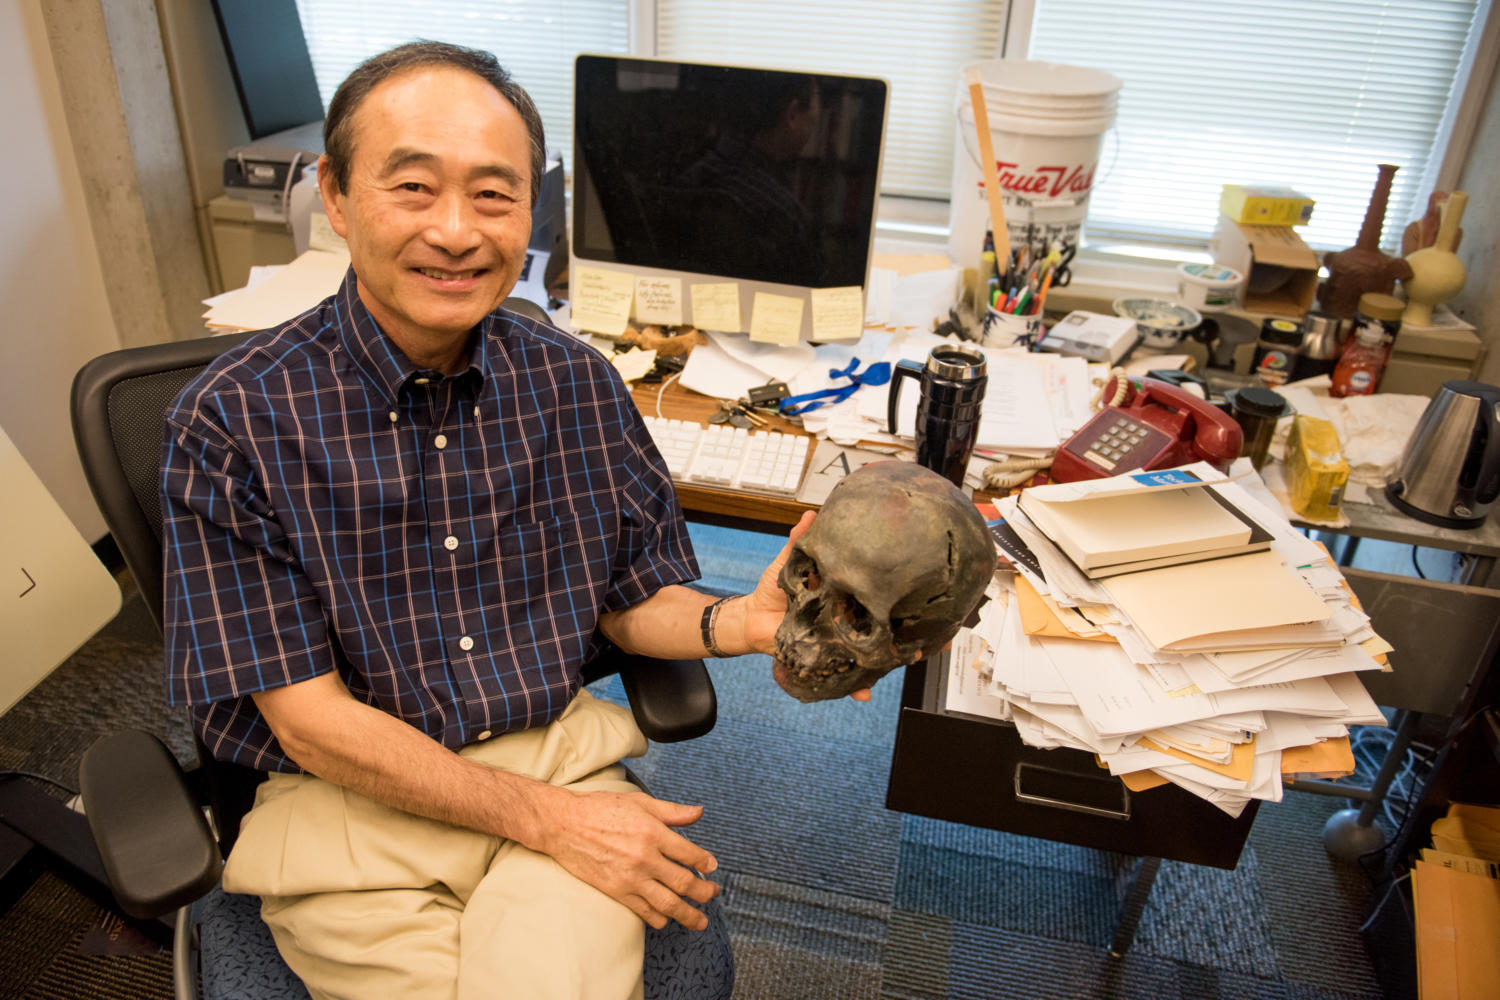 Professor of Anthropology Izumi Shimada, of Carbondale, flashes a smile for a portrait Monday, Aug. 28, 2017, at his office in Faner Hall. Shimada has been studying the Peruvian subculture, which he named the Sicans, for the past 38 years. “You have to learn how to take care of human remains,” Shimada said. The skull that Shimada is holding is a replica of a skull found while excavating in Peru that was 3-D printed at the Tokyo Metro Police Headquarters in Tokyo, Japan. (Brian Muñoz | @BrianMMunoz)